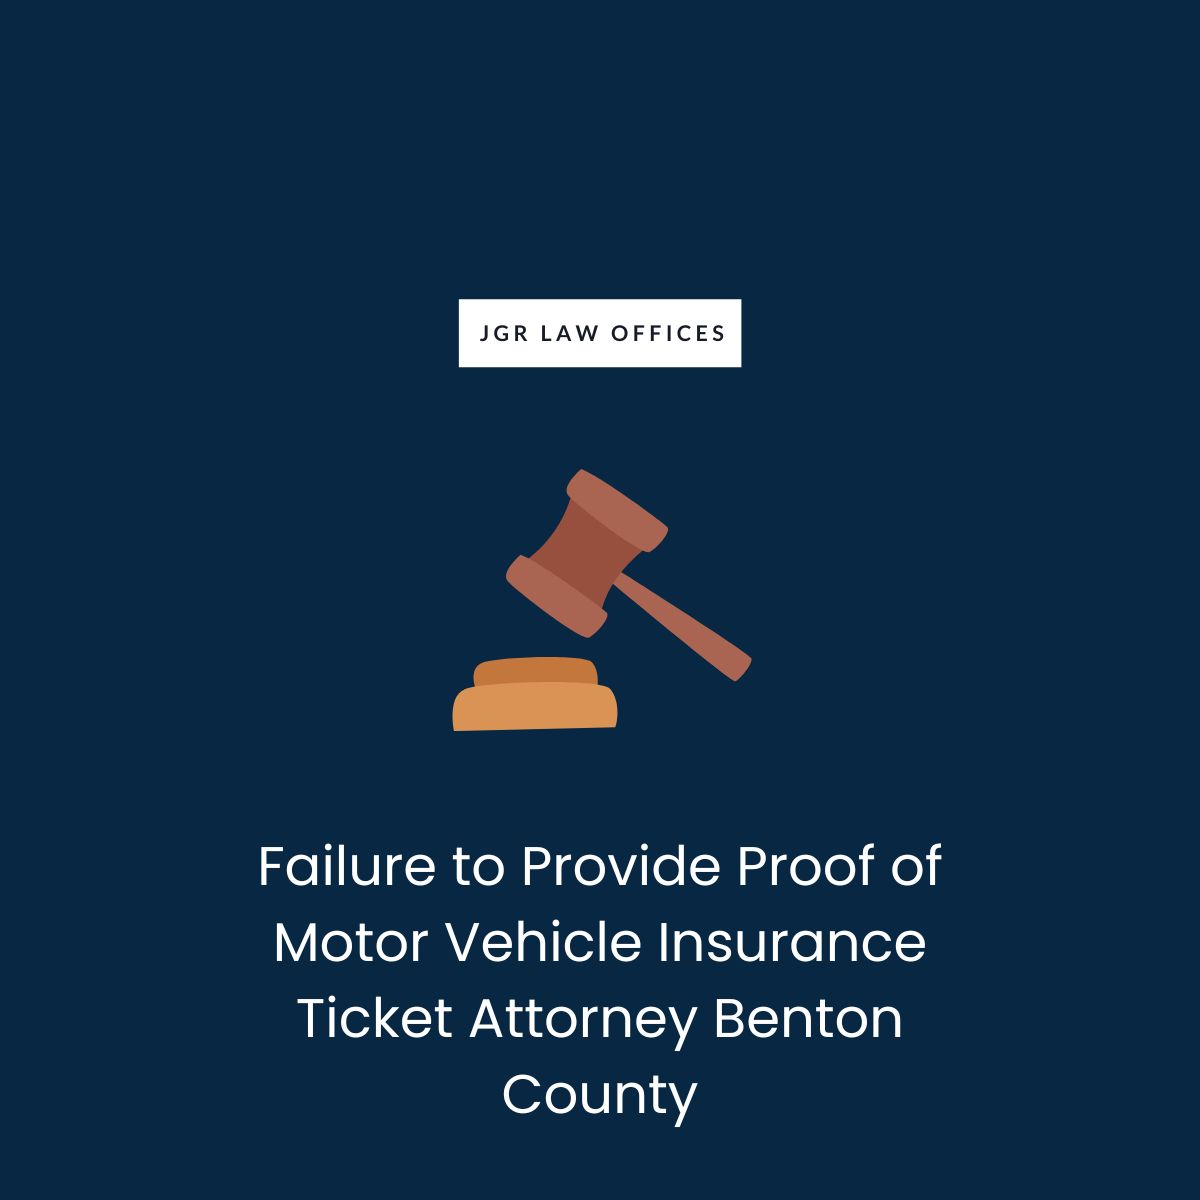 Failure to Provide Proof of Motor Vehicle Insurance Ticket Attorney Benton County